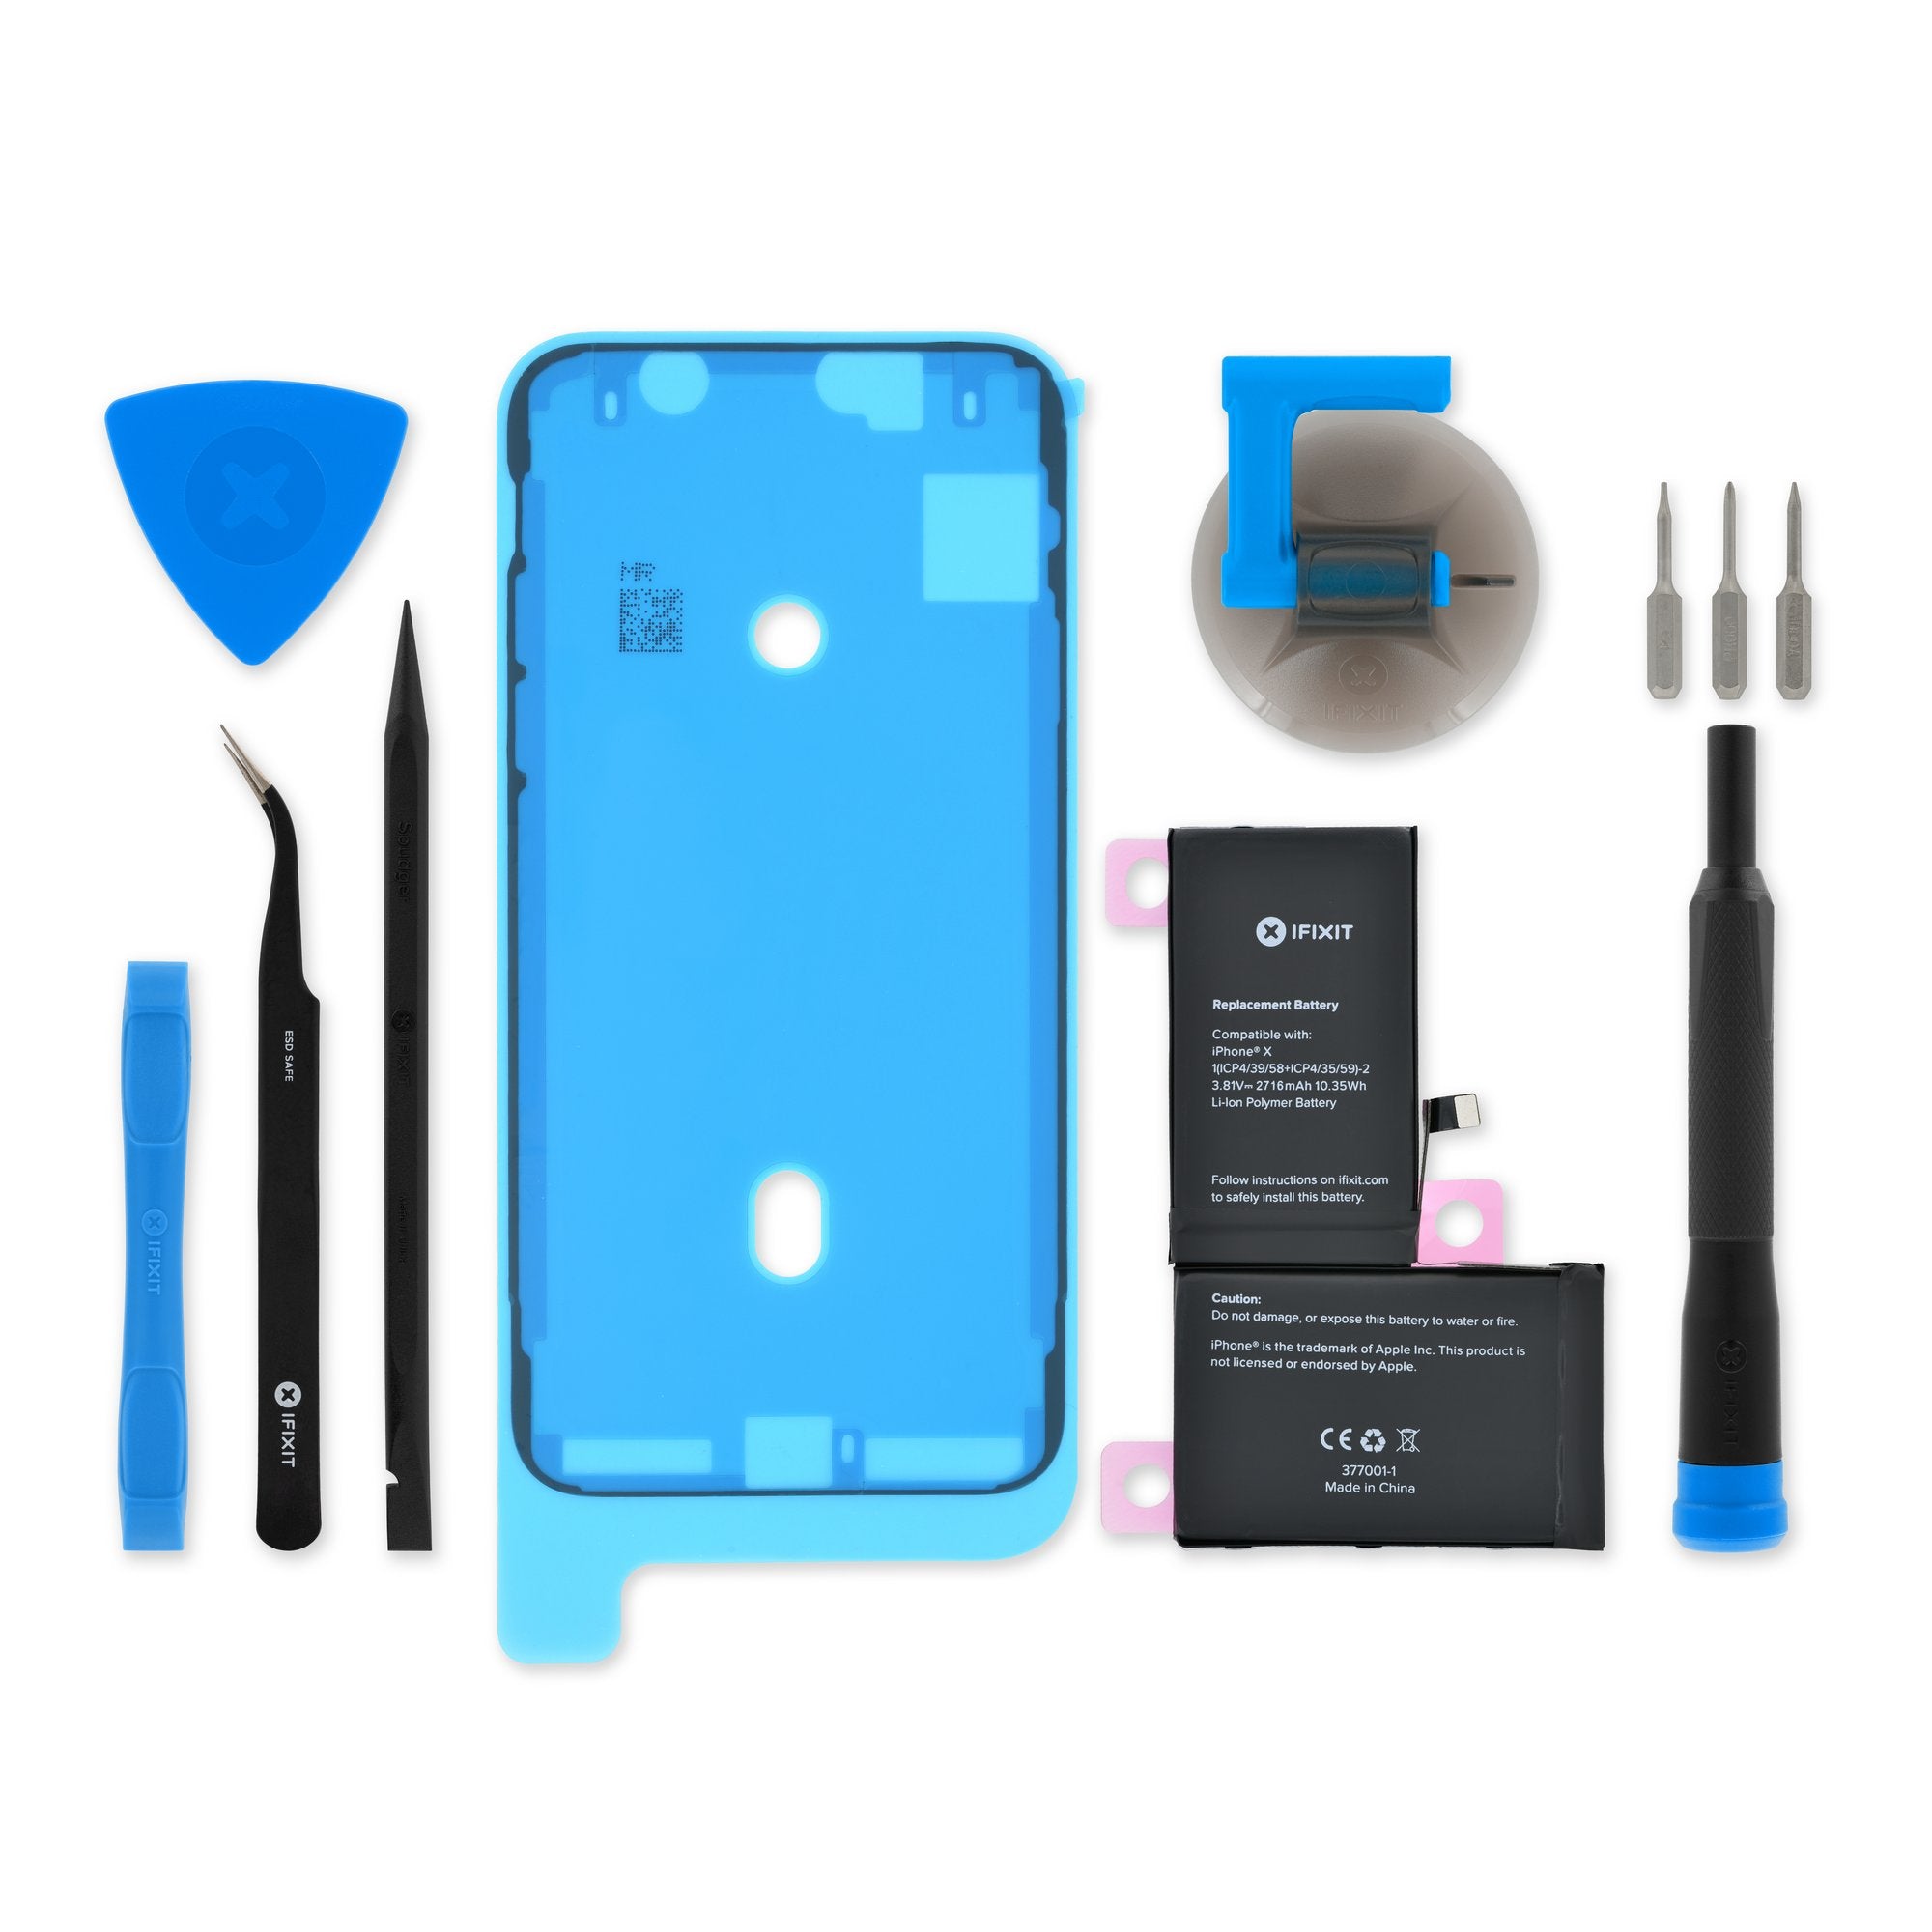 iPhone 5s/5c/SE (1st Gen) Battery Adhesive Strips